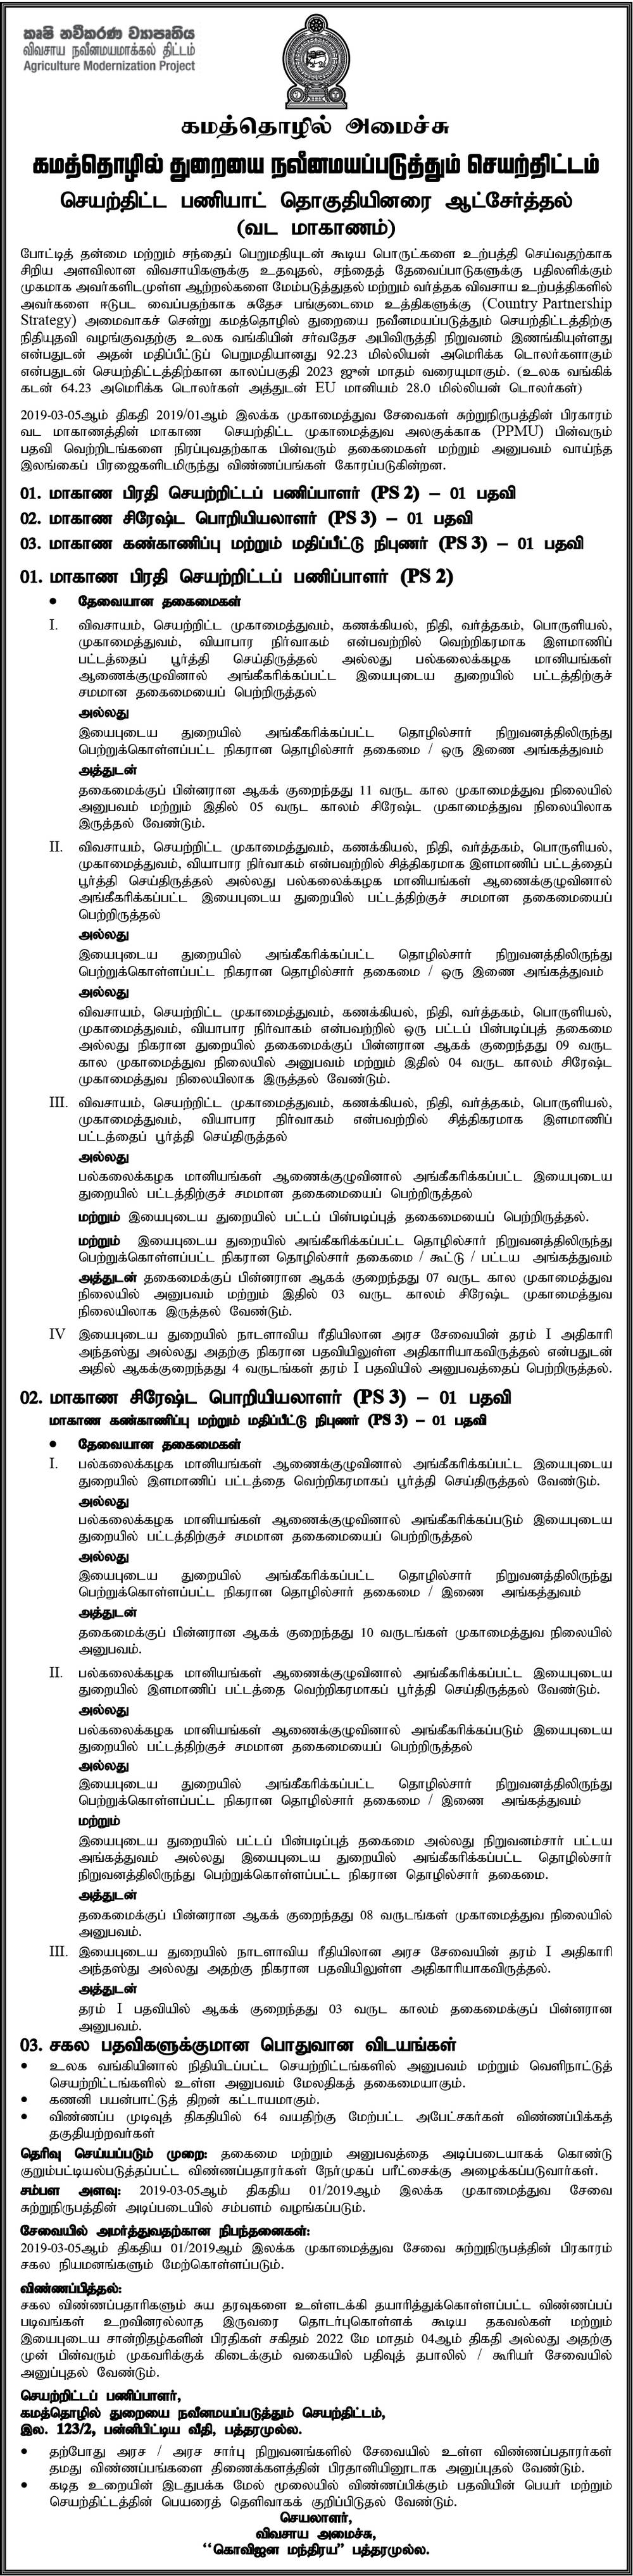 Ministry of Agriculture Vacancies 2022 Tamil